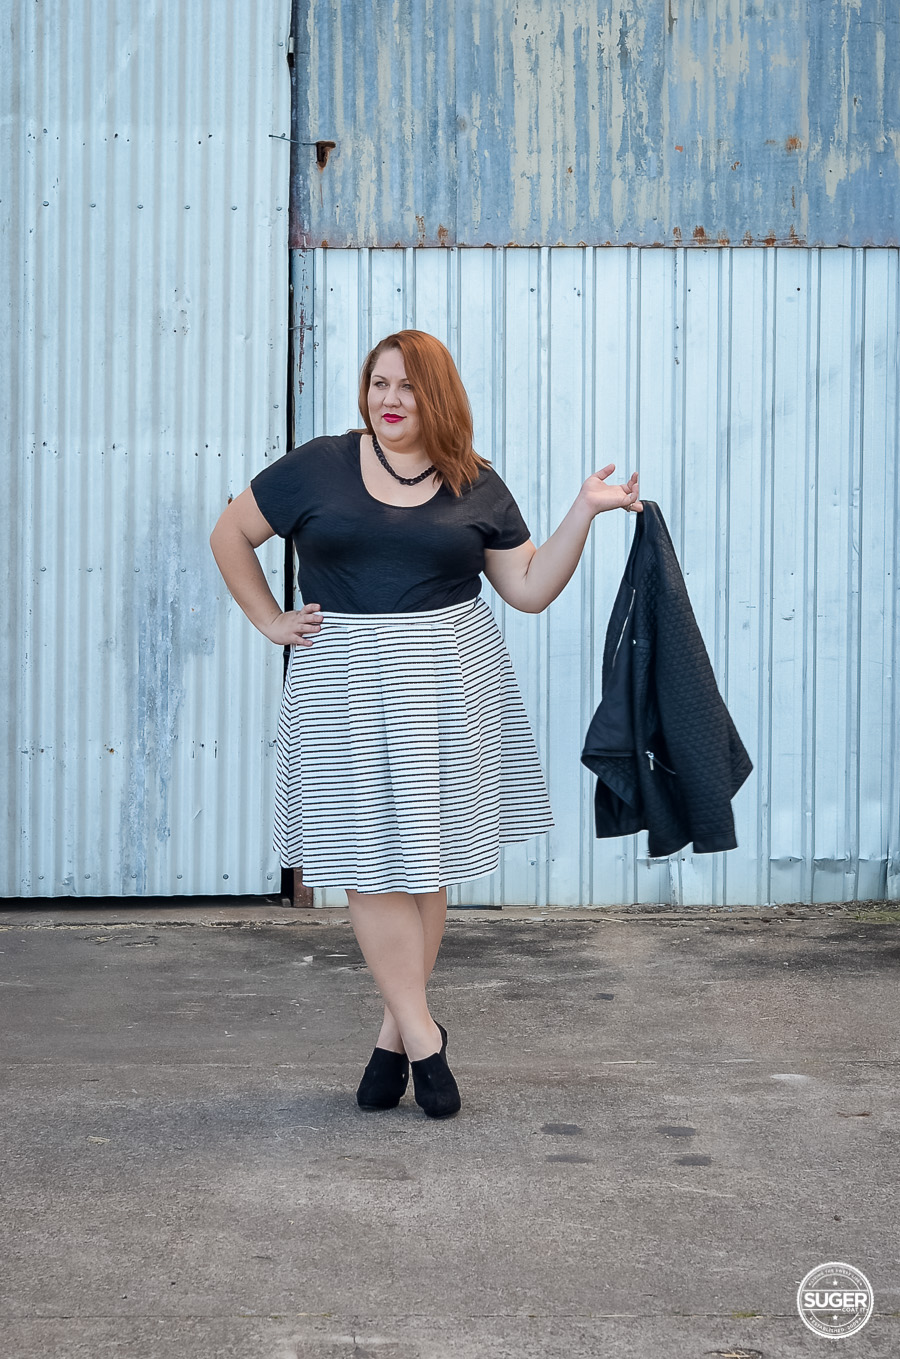 How ankle boots as a plus size woman • Suger It